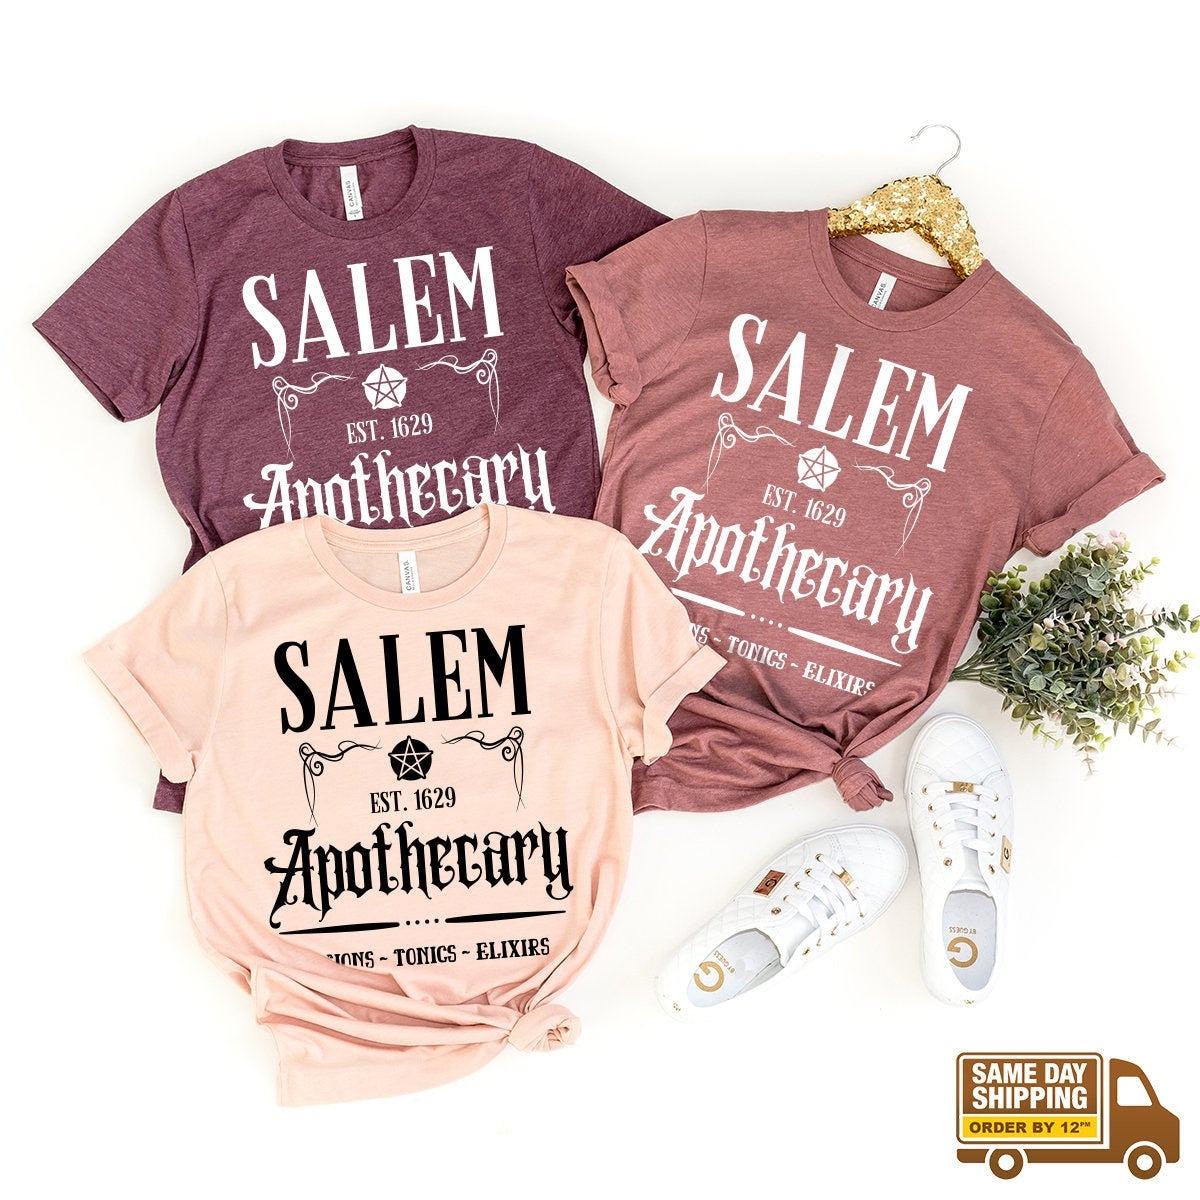 Buy Salem Witchcraft Hocus Pocus Sister Sanderson Halloween shirt For Free  Shipping CUSTOM XMAS PRODUCT COMPANY